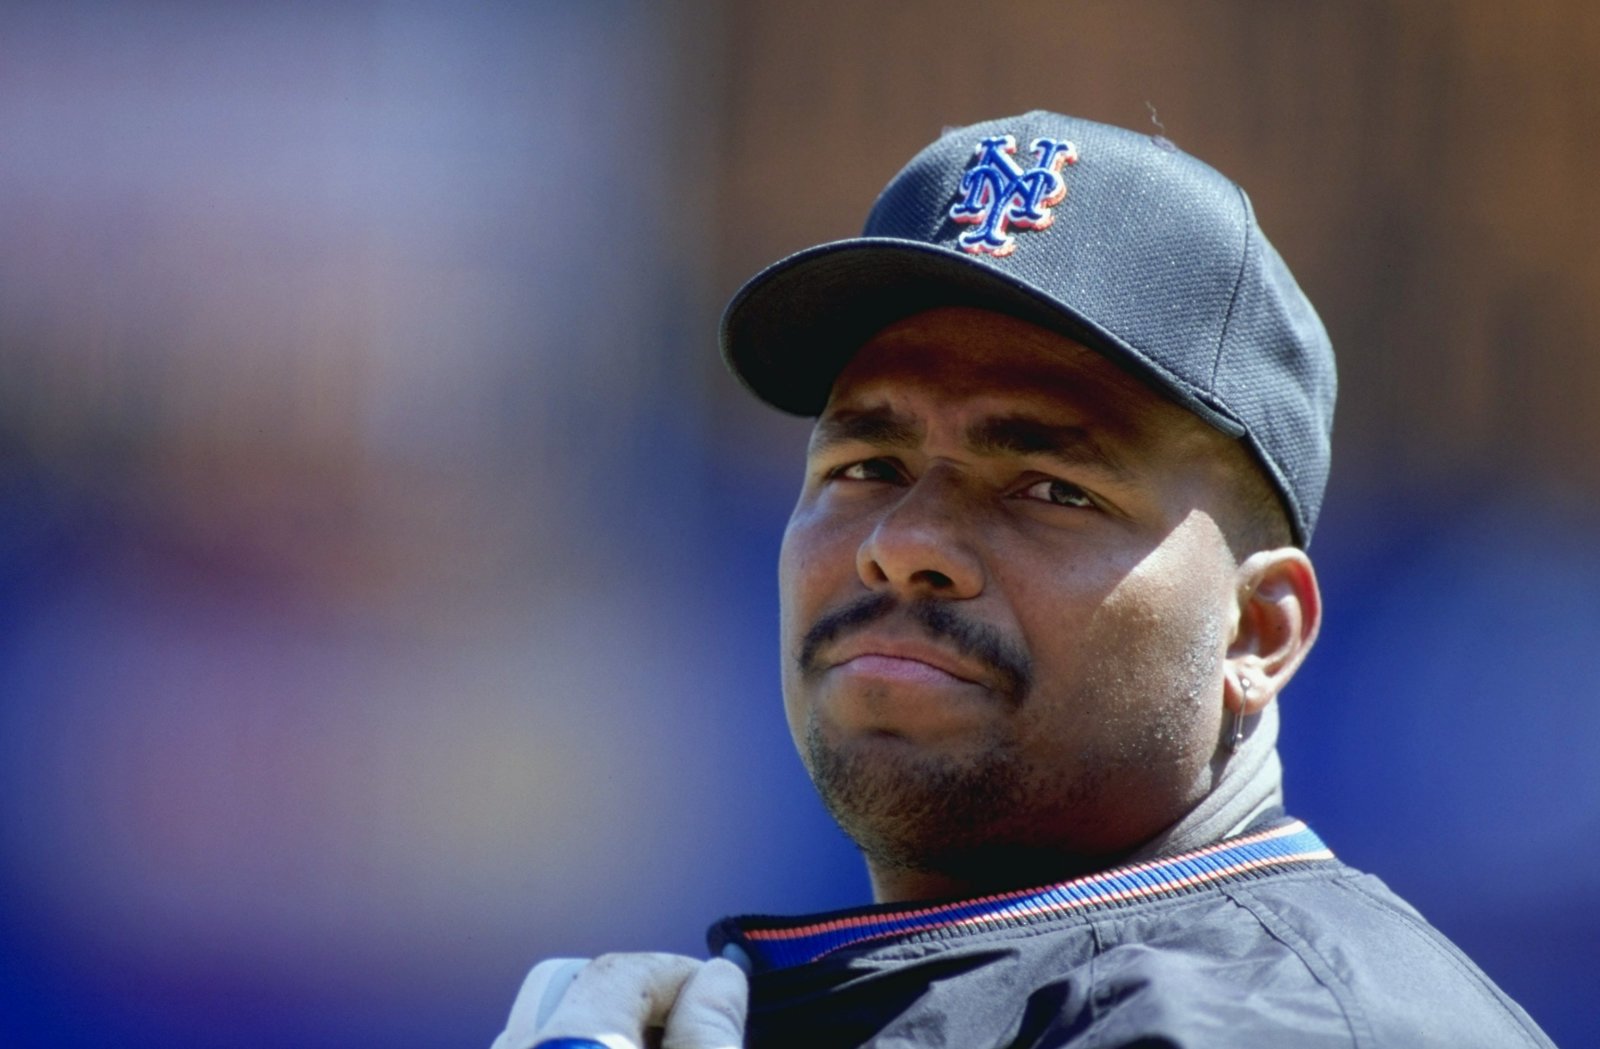 Bobby Bonilla Day: Contract helped Mets land club legend David Wright